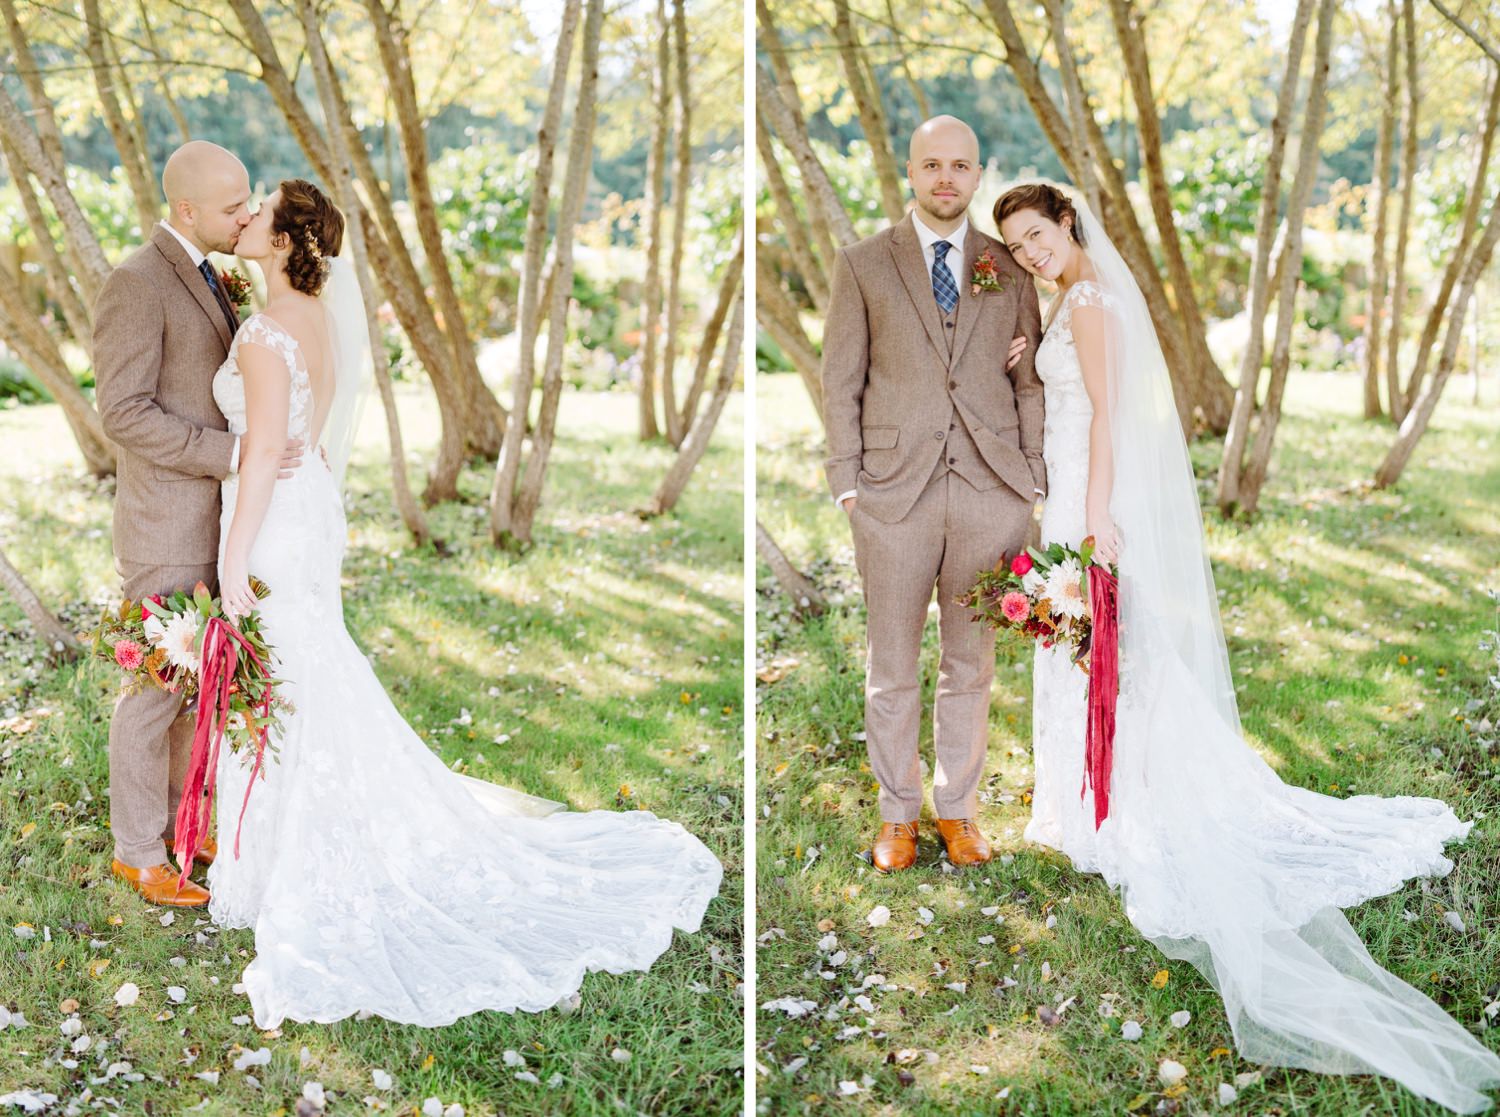 couple's portraits taken by cameron zegers photography at fireseed catering wedding venue